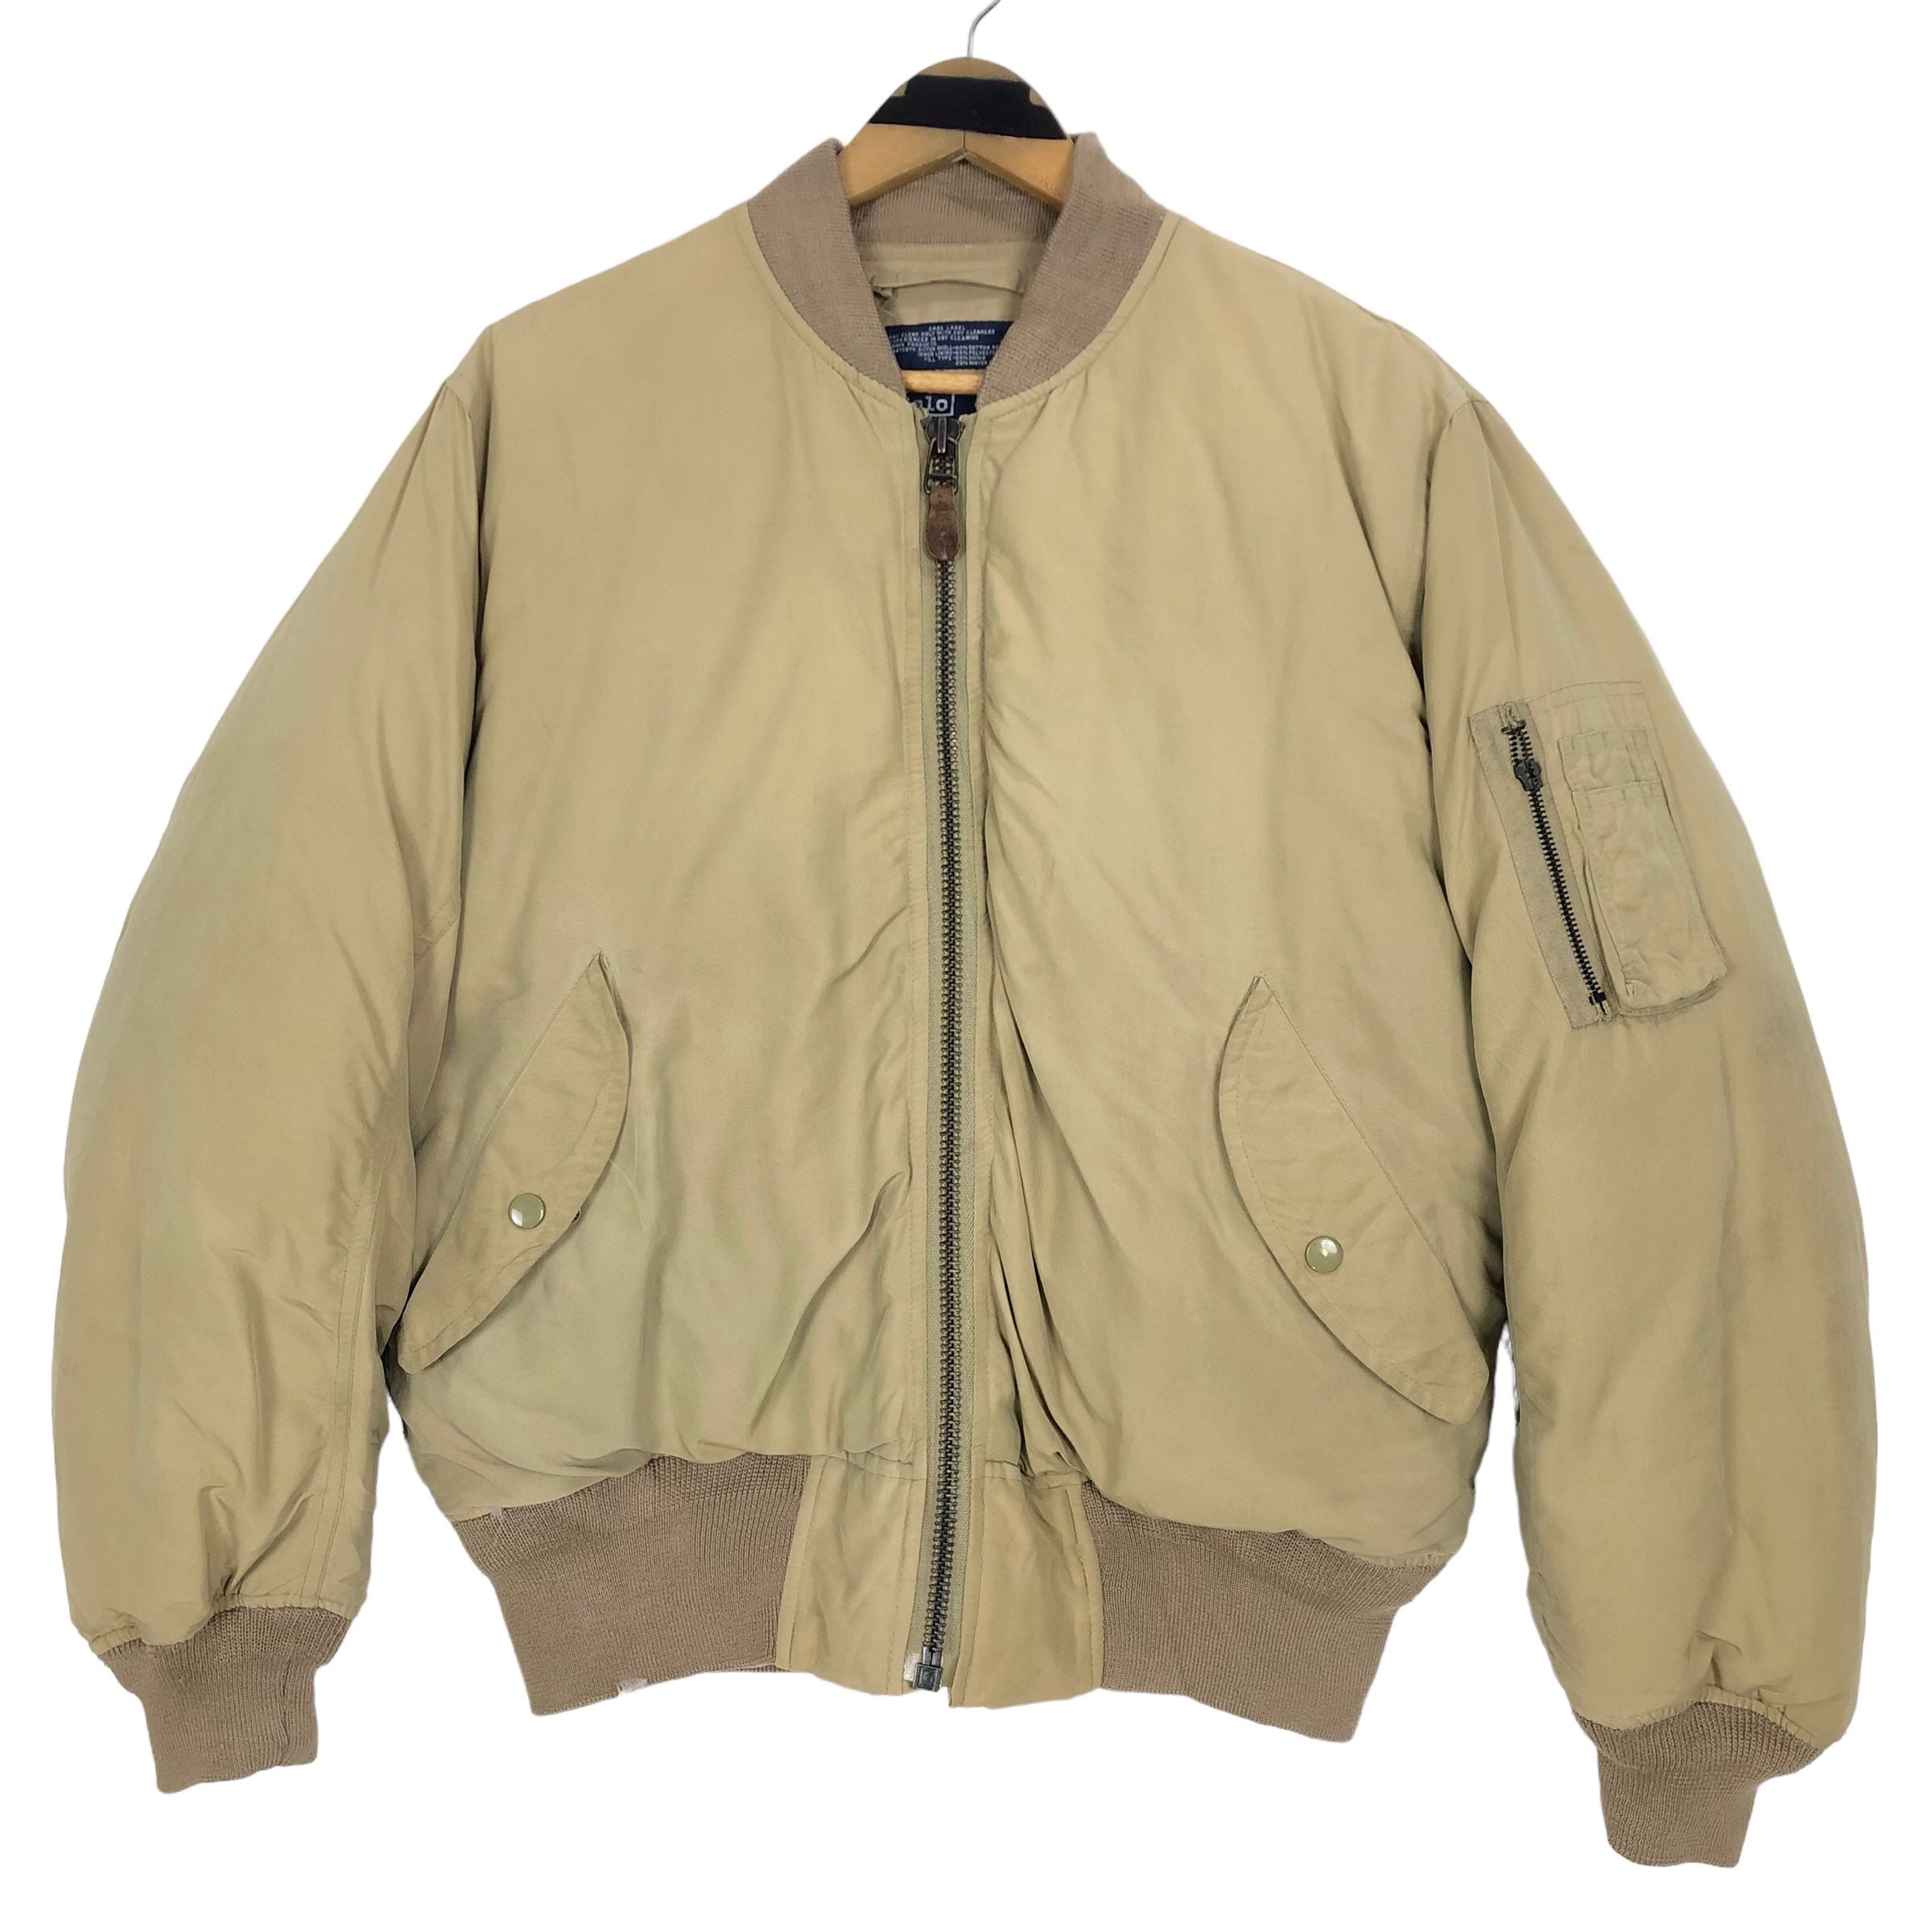 Vintage 90s Polo by Ralph Lauren Down Filled Bomber Jacket Full